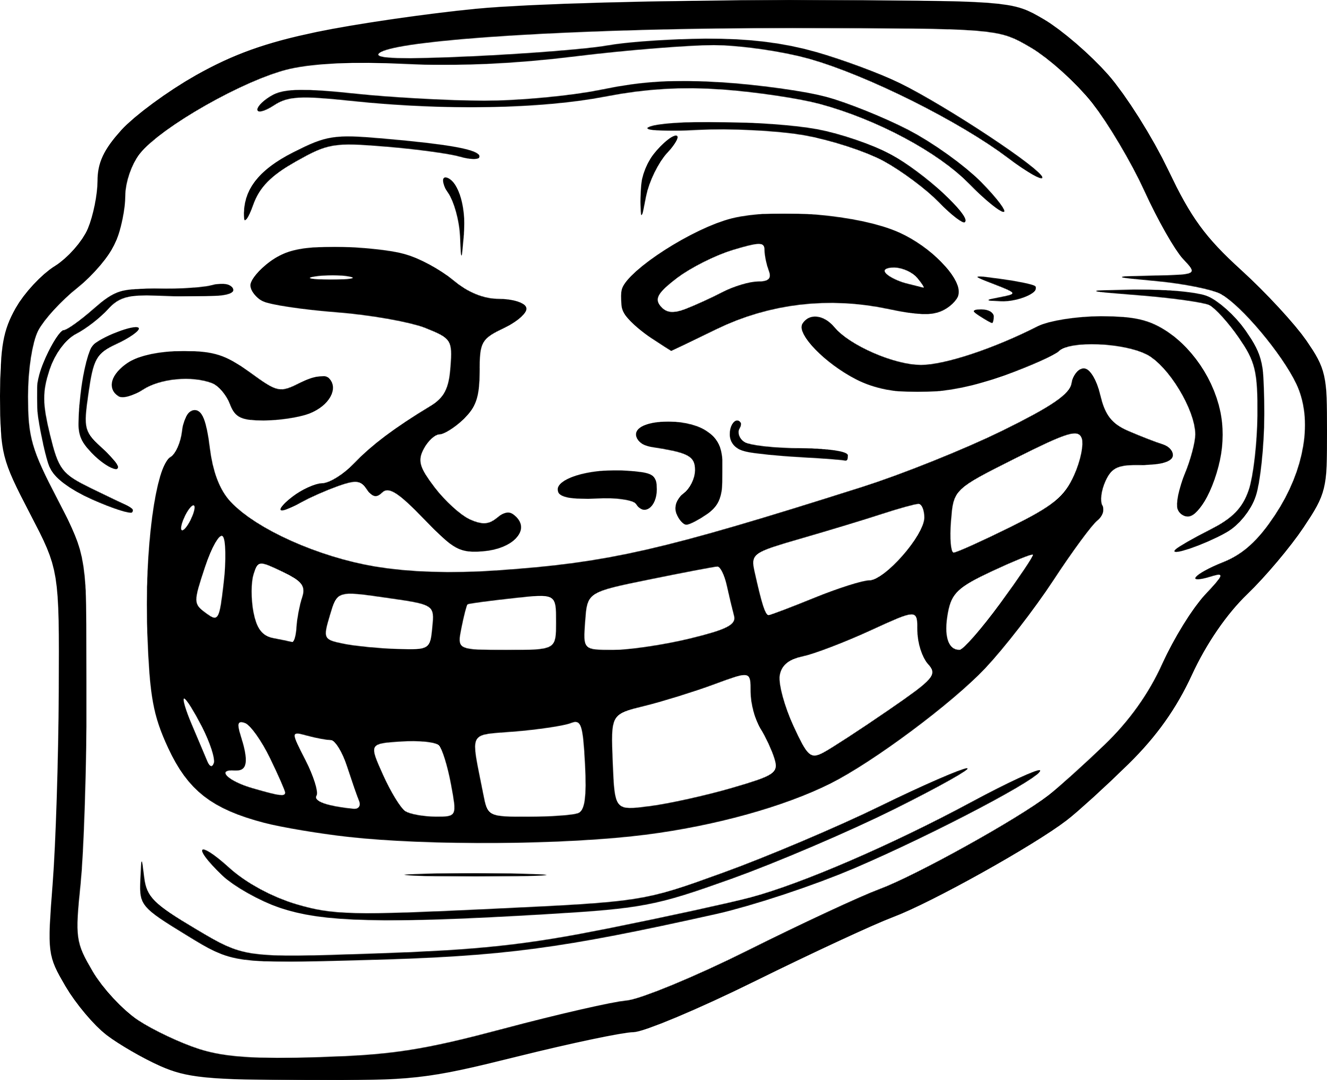 http://images3.wikia.nocookie.net/__cb20100523212231/halofanon/images/6/6e/Troll_Face_small.png